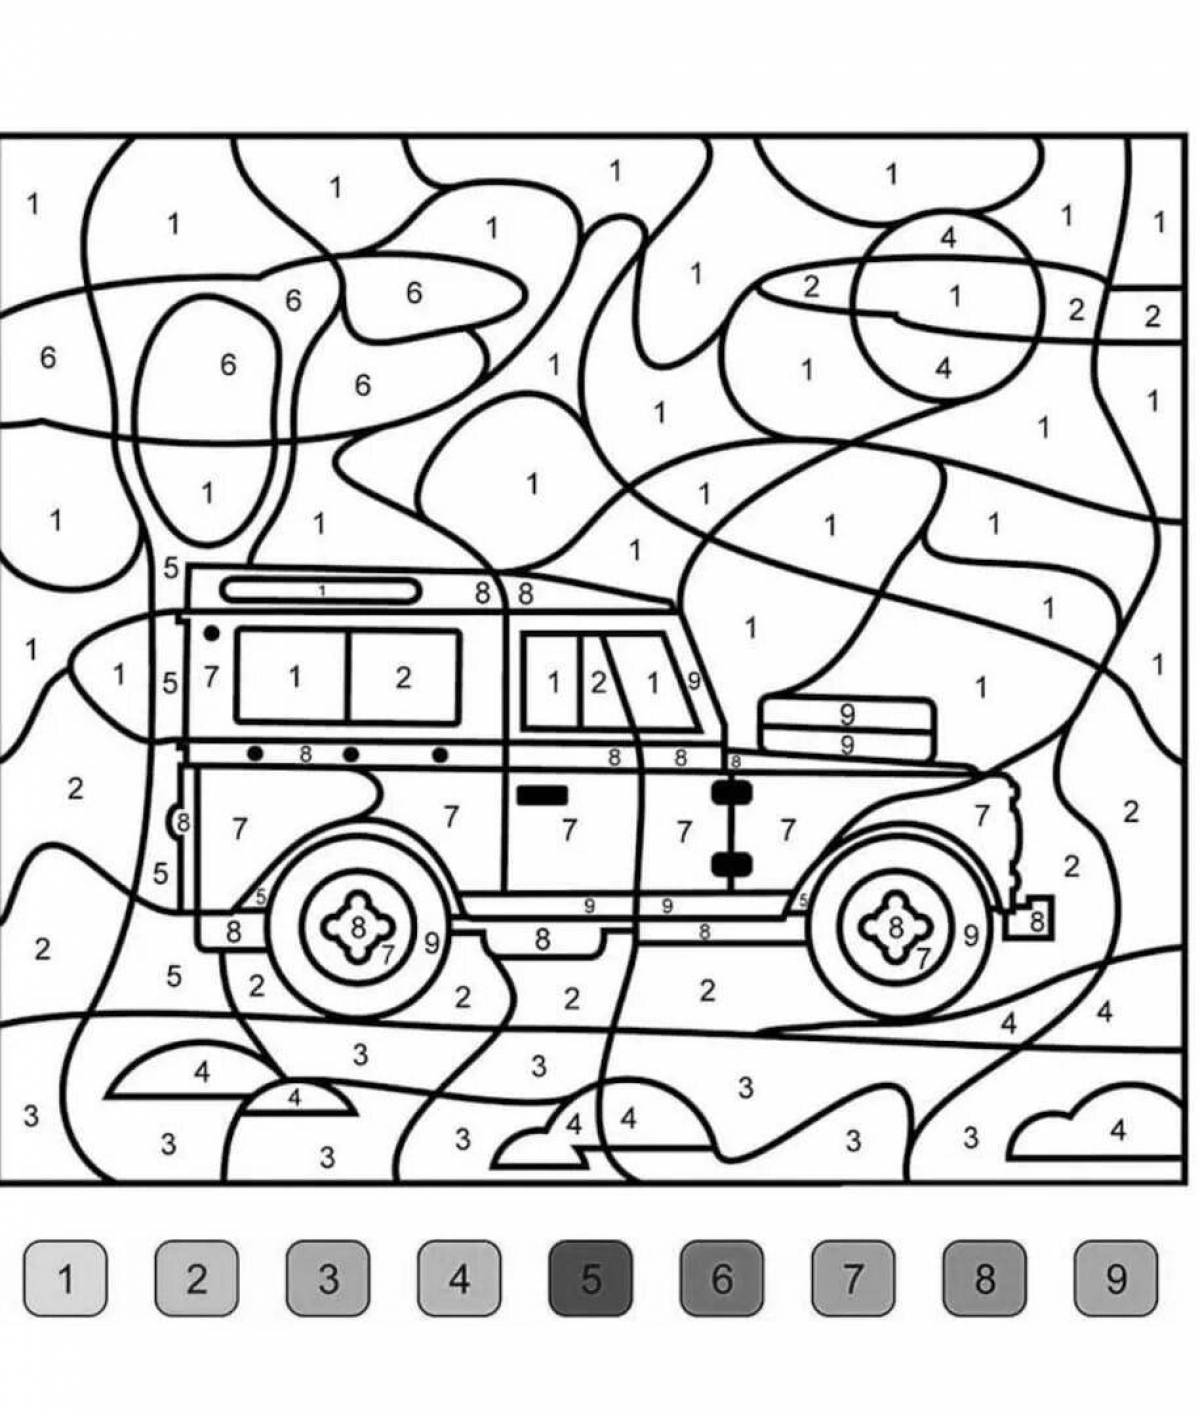 Mystic cars by numbers coloring book